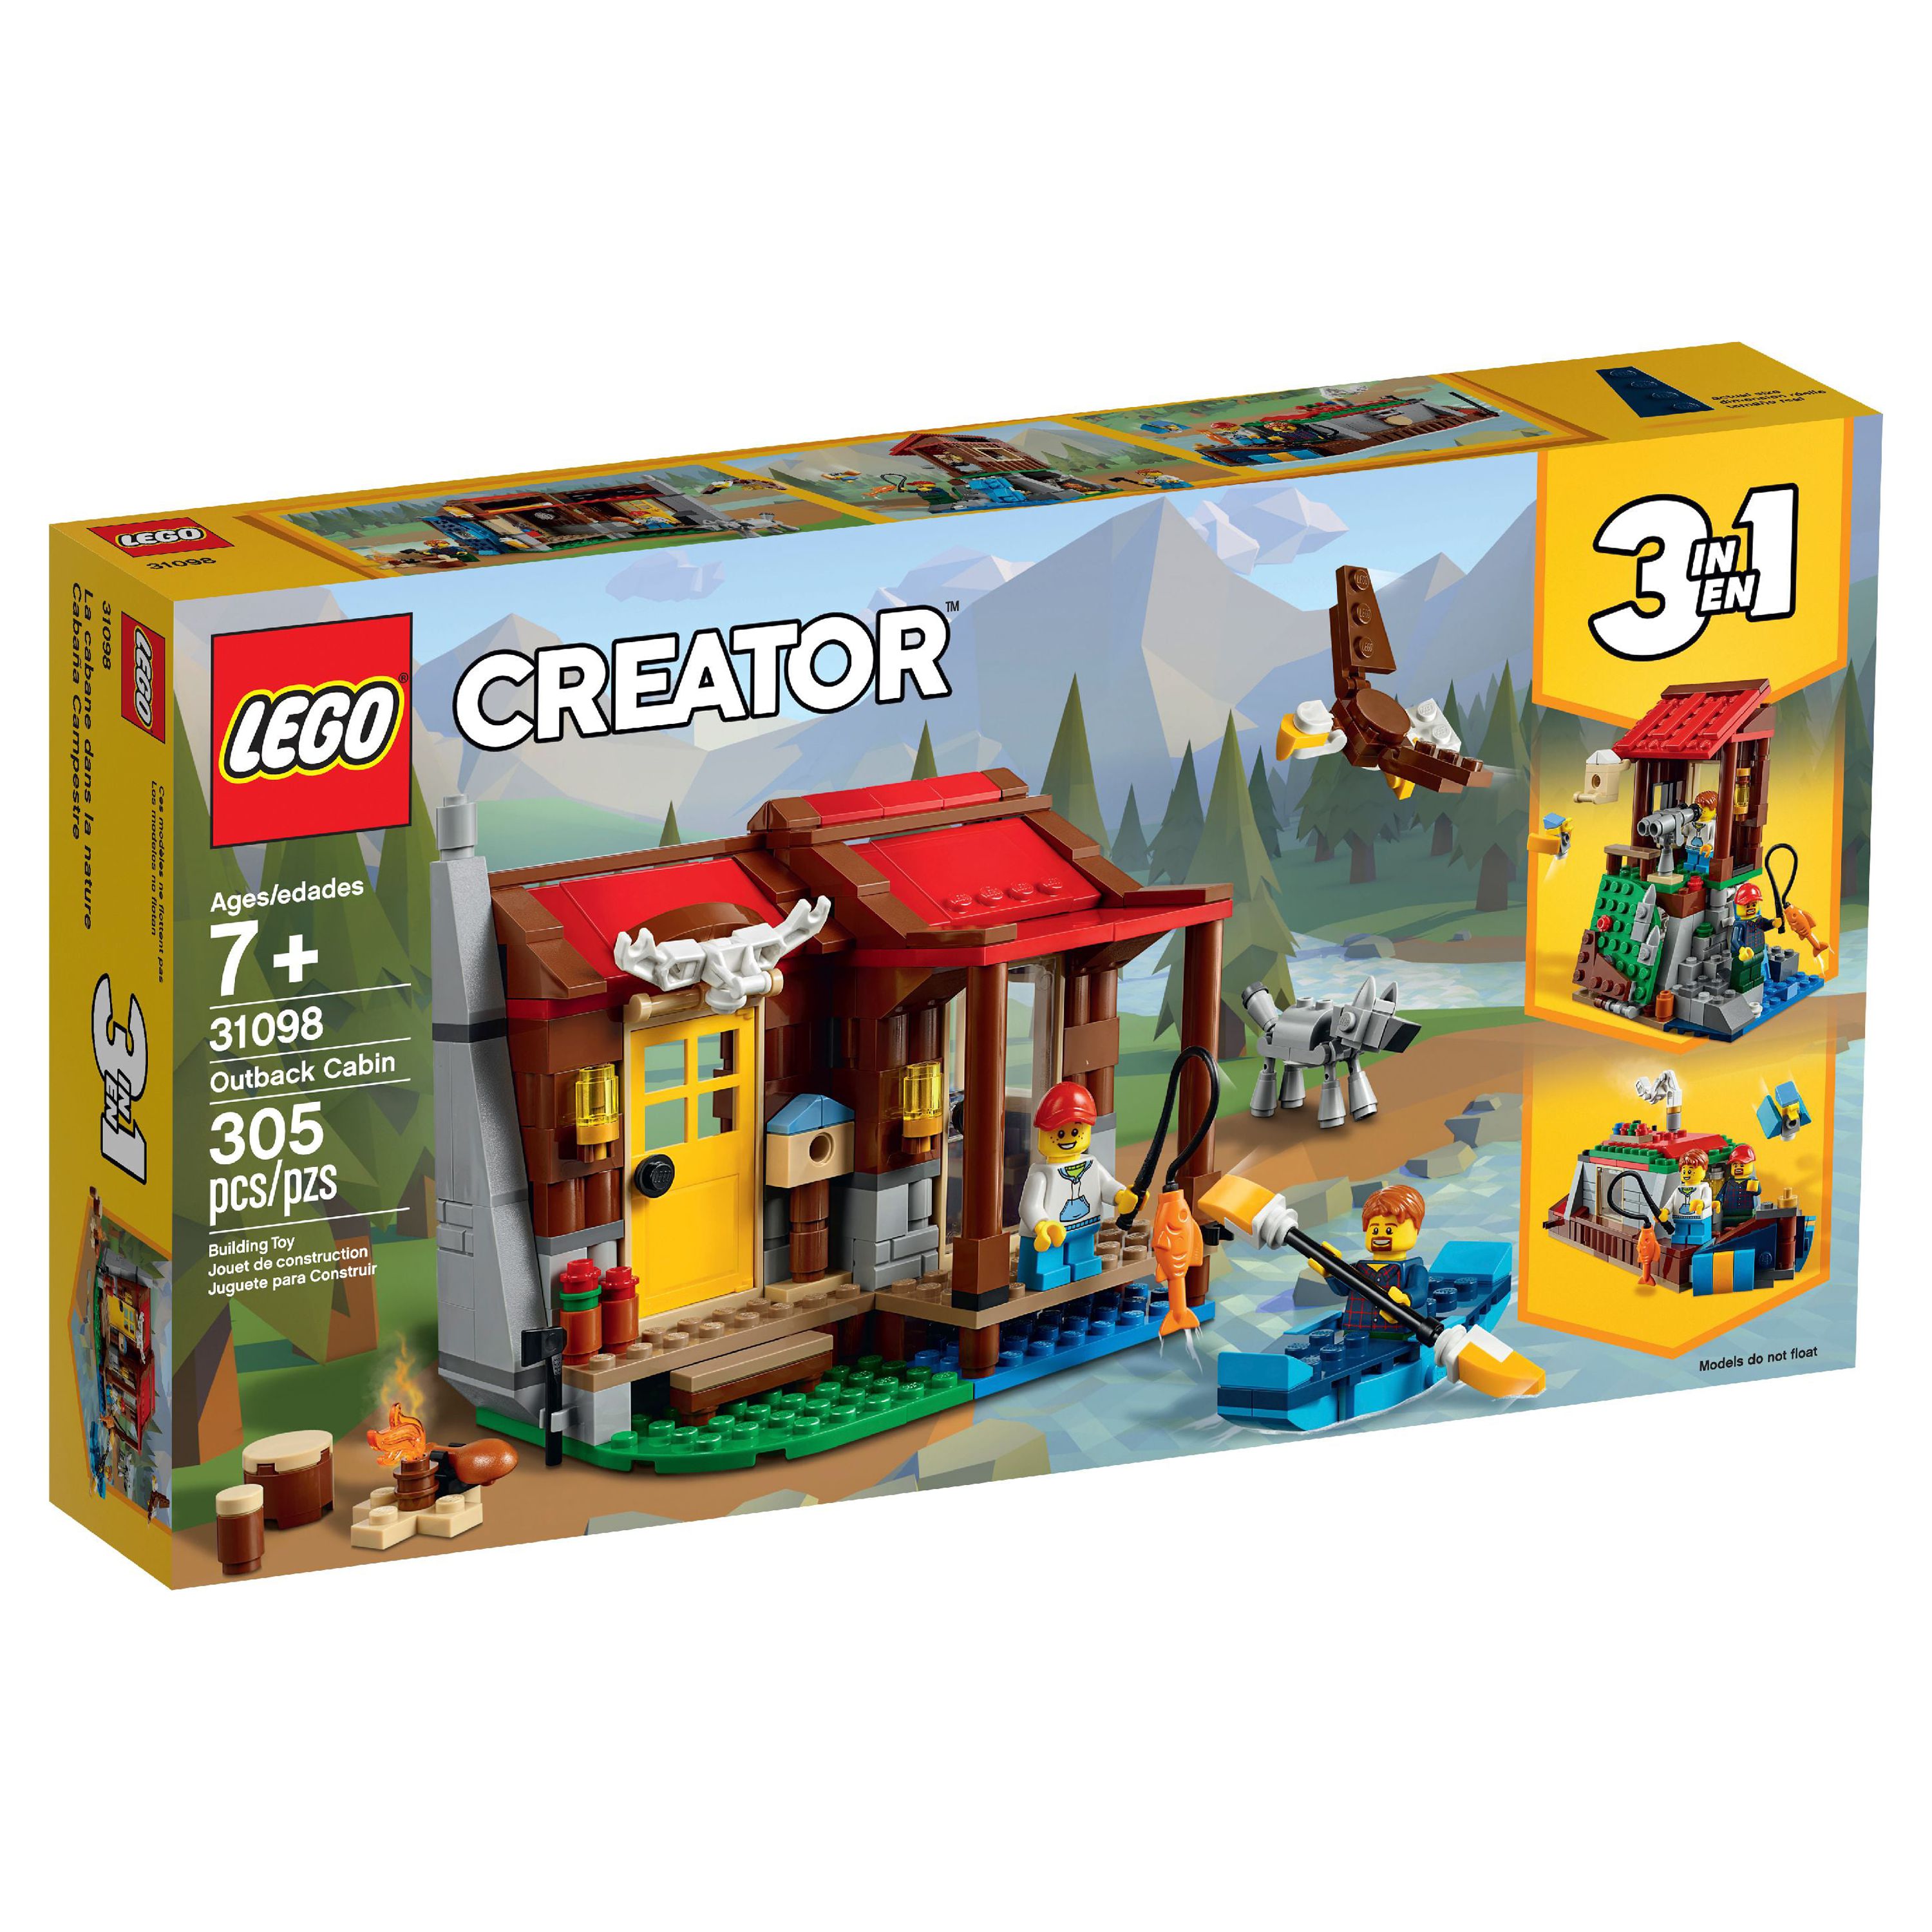 LEGO Creator Outback Cabin 31098 Toy Building Kit (305 Pieces) - image 5 of 8